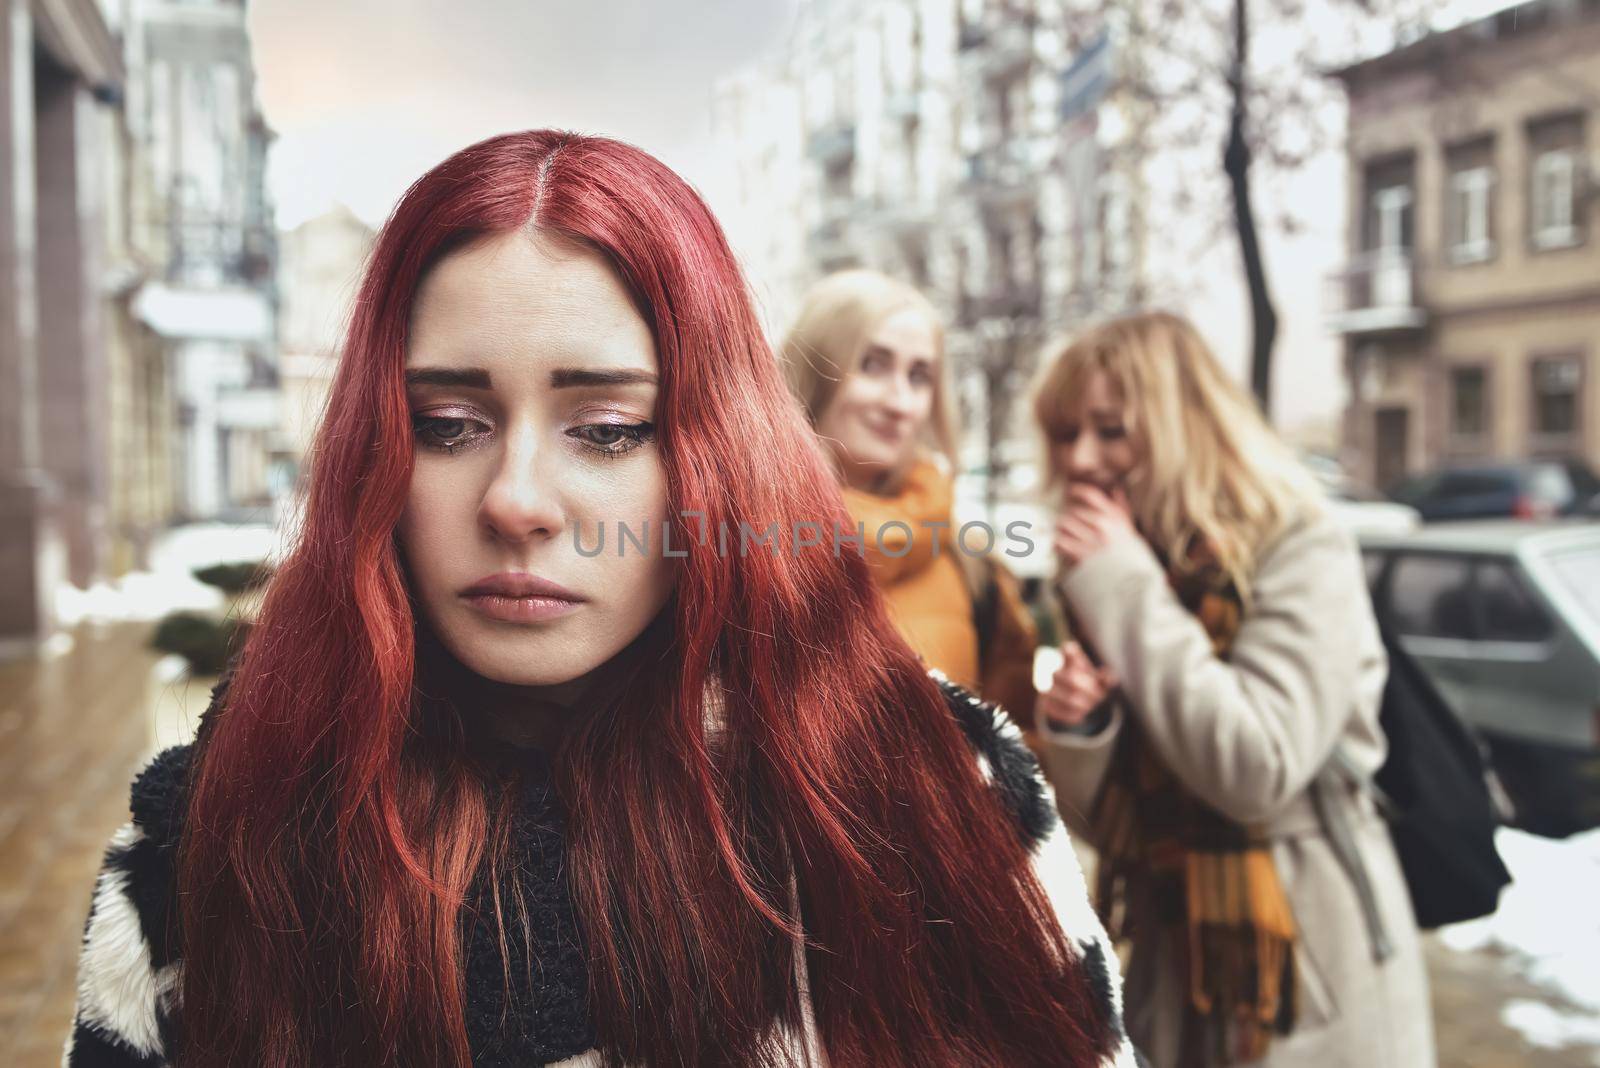 a young depressed student girl with red hair who is bullied by her teenage peers, disturbed by feelings of despair and suffering from oppression. social problems